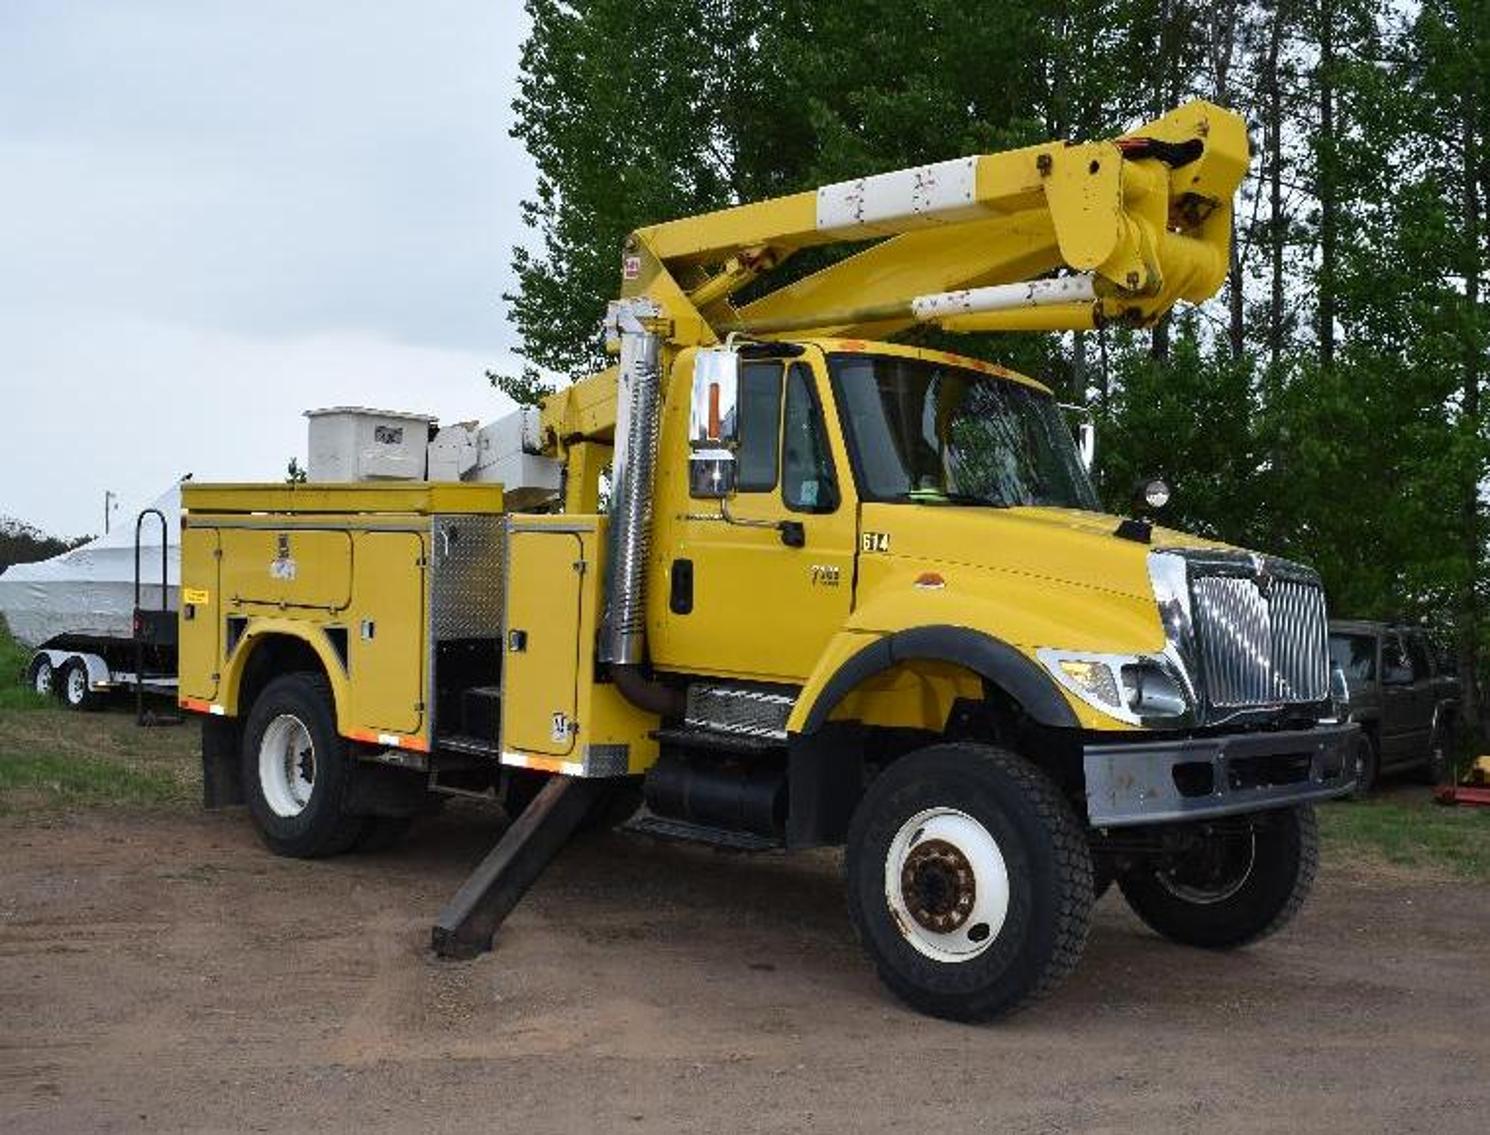 Utility Contractor Vehicles, Trucks, Semi Trailers, Cab/Chassis